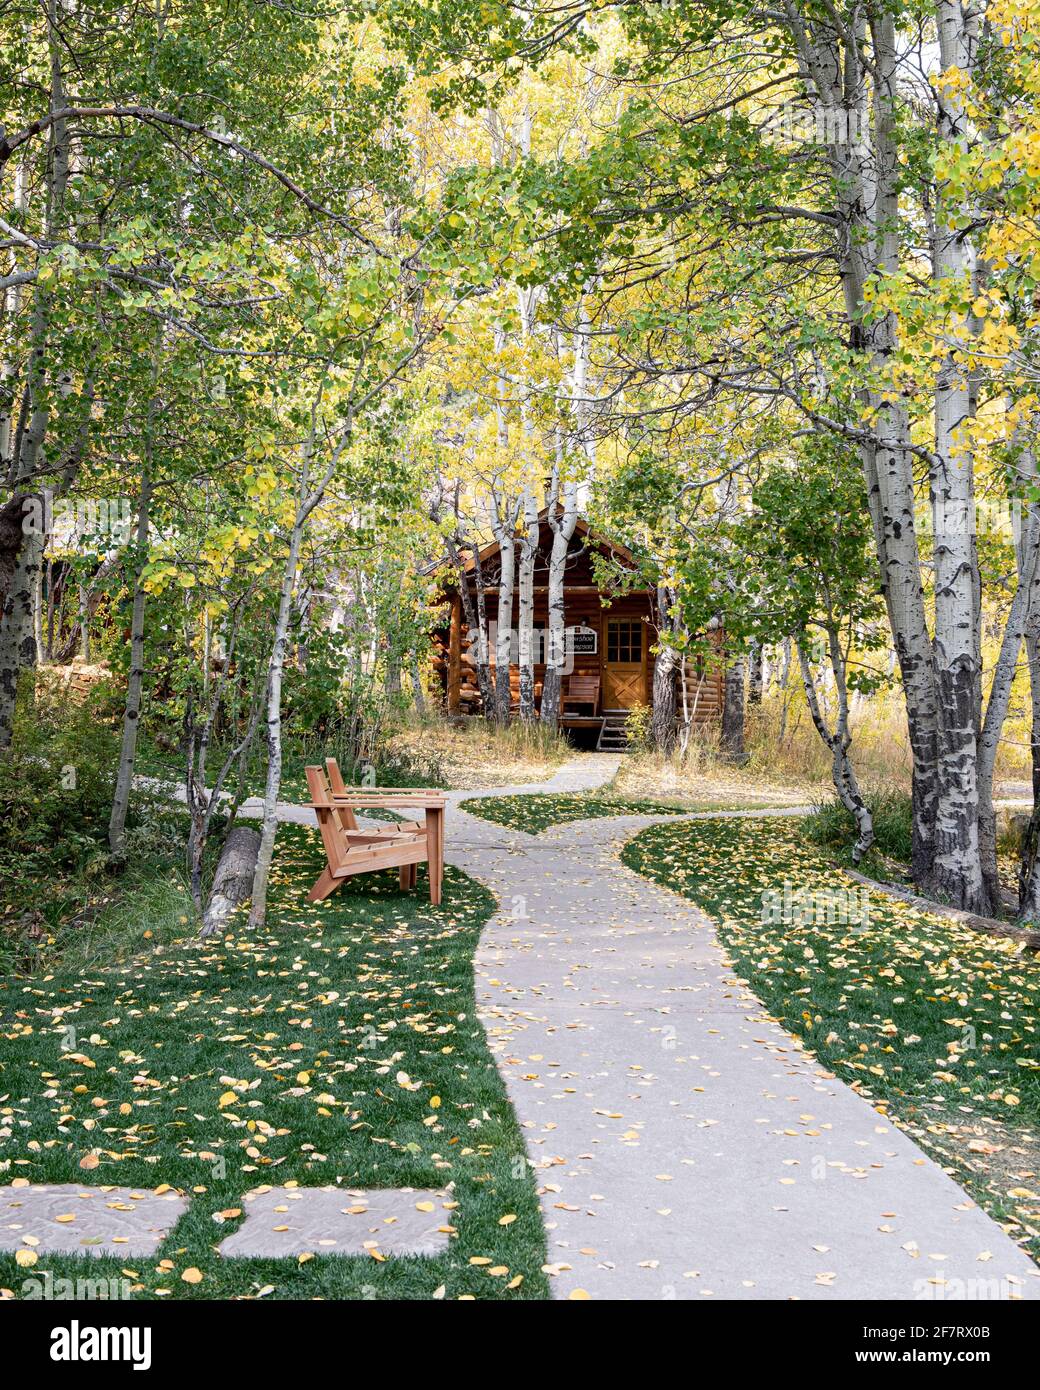 Cabin at the Wylder Hotel, former Sorensen's resort, in the Hope Valley near Markleeville, a famous tourist spot in the Fall, featuring yellow leaves Stock Photo